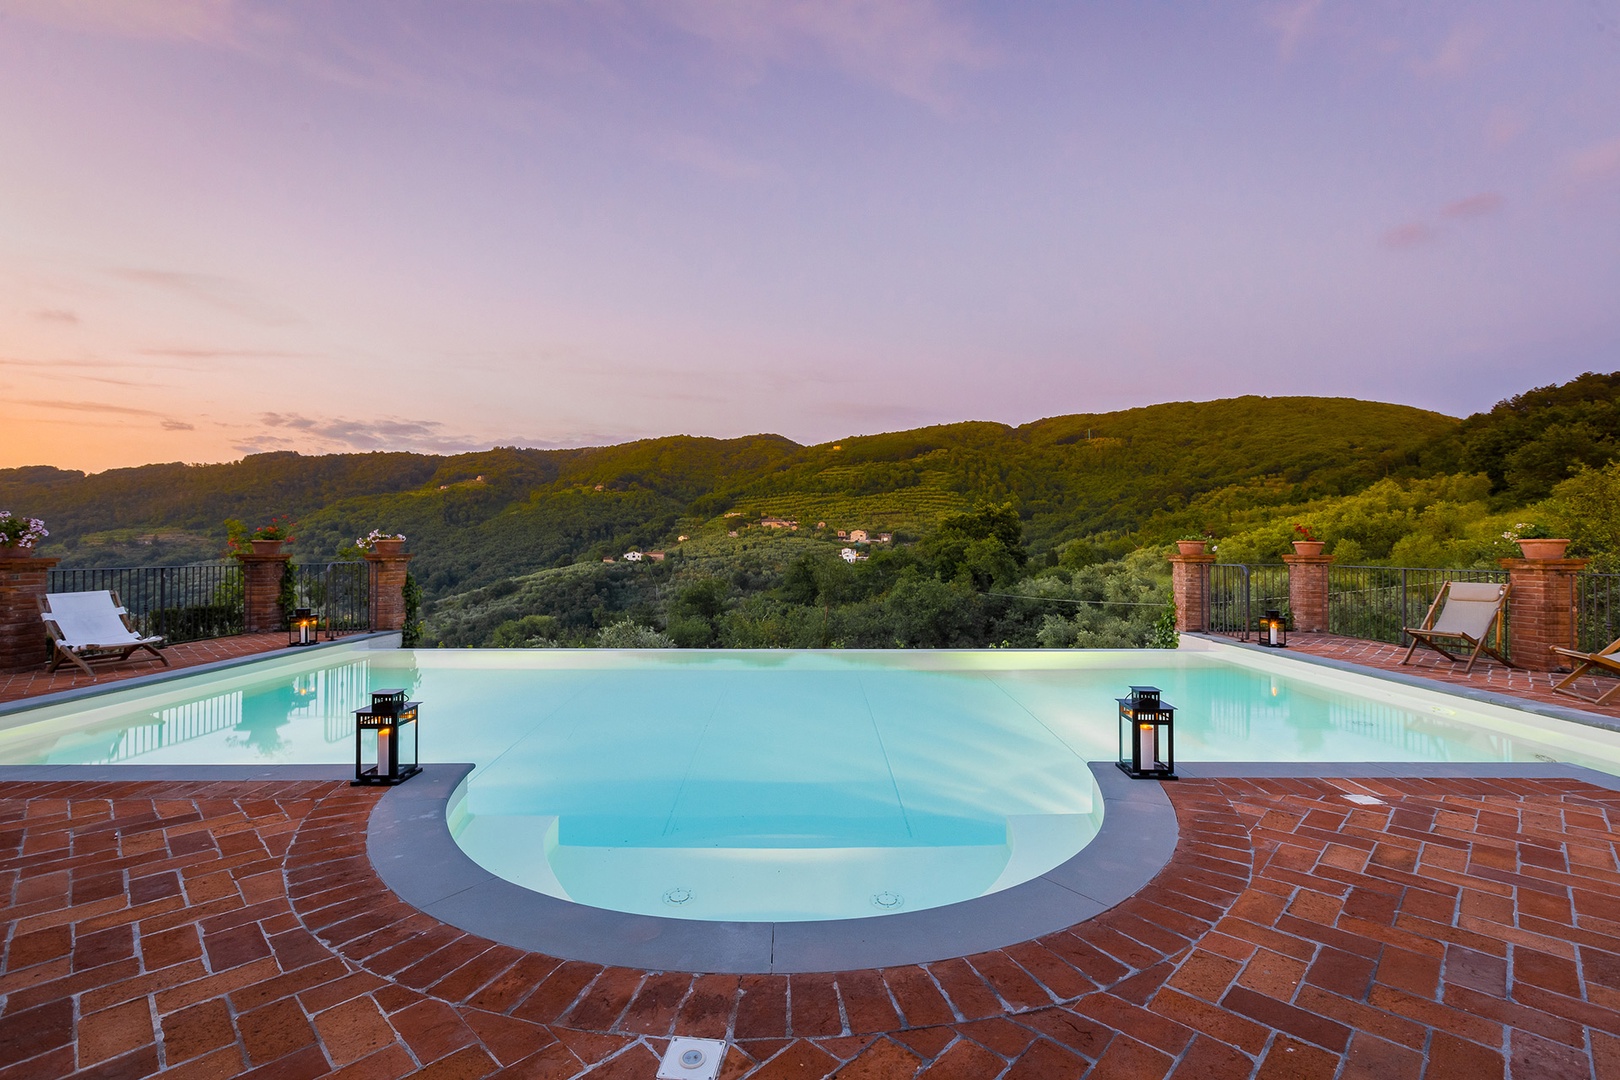 Infinity pool view of Tuscan hills.